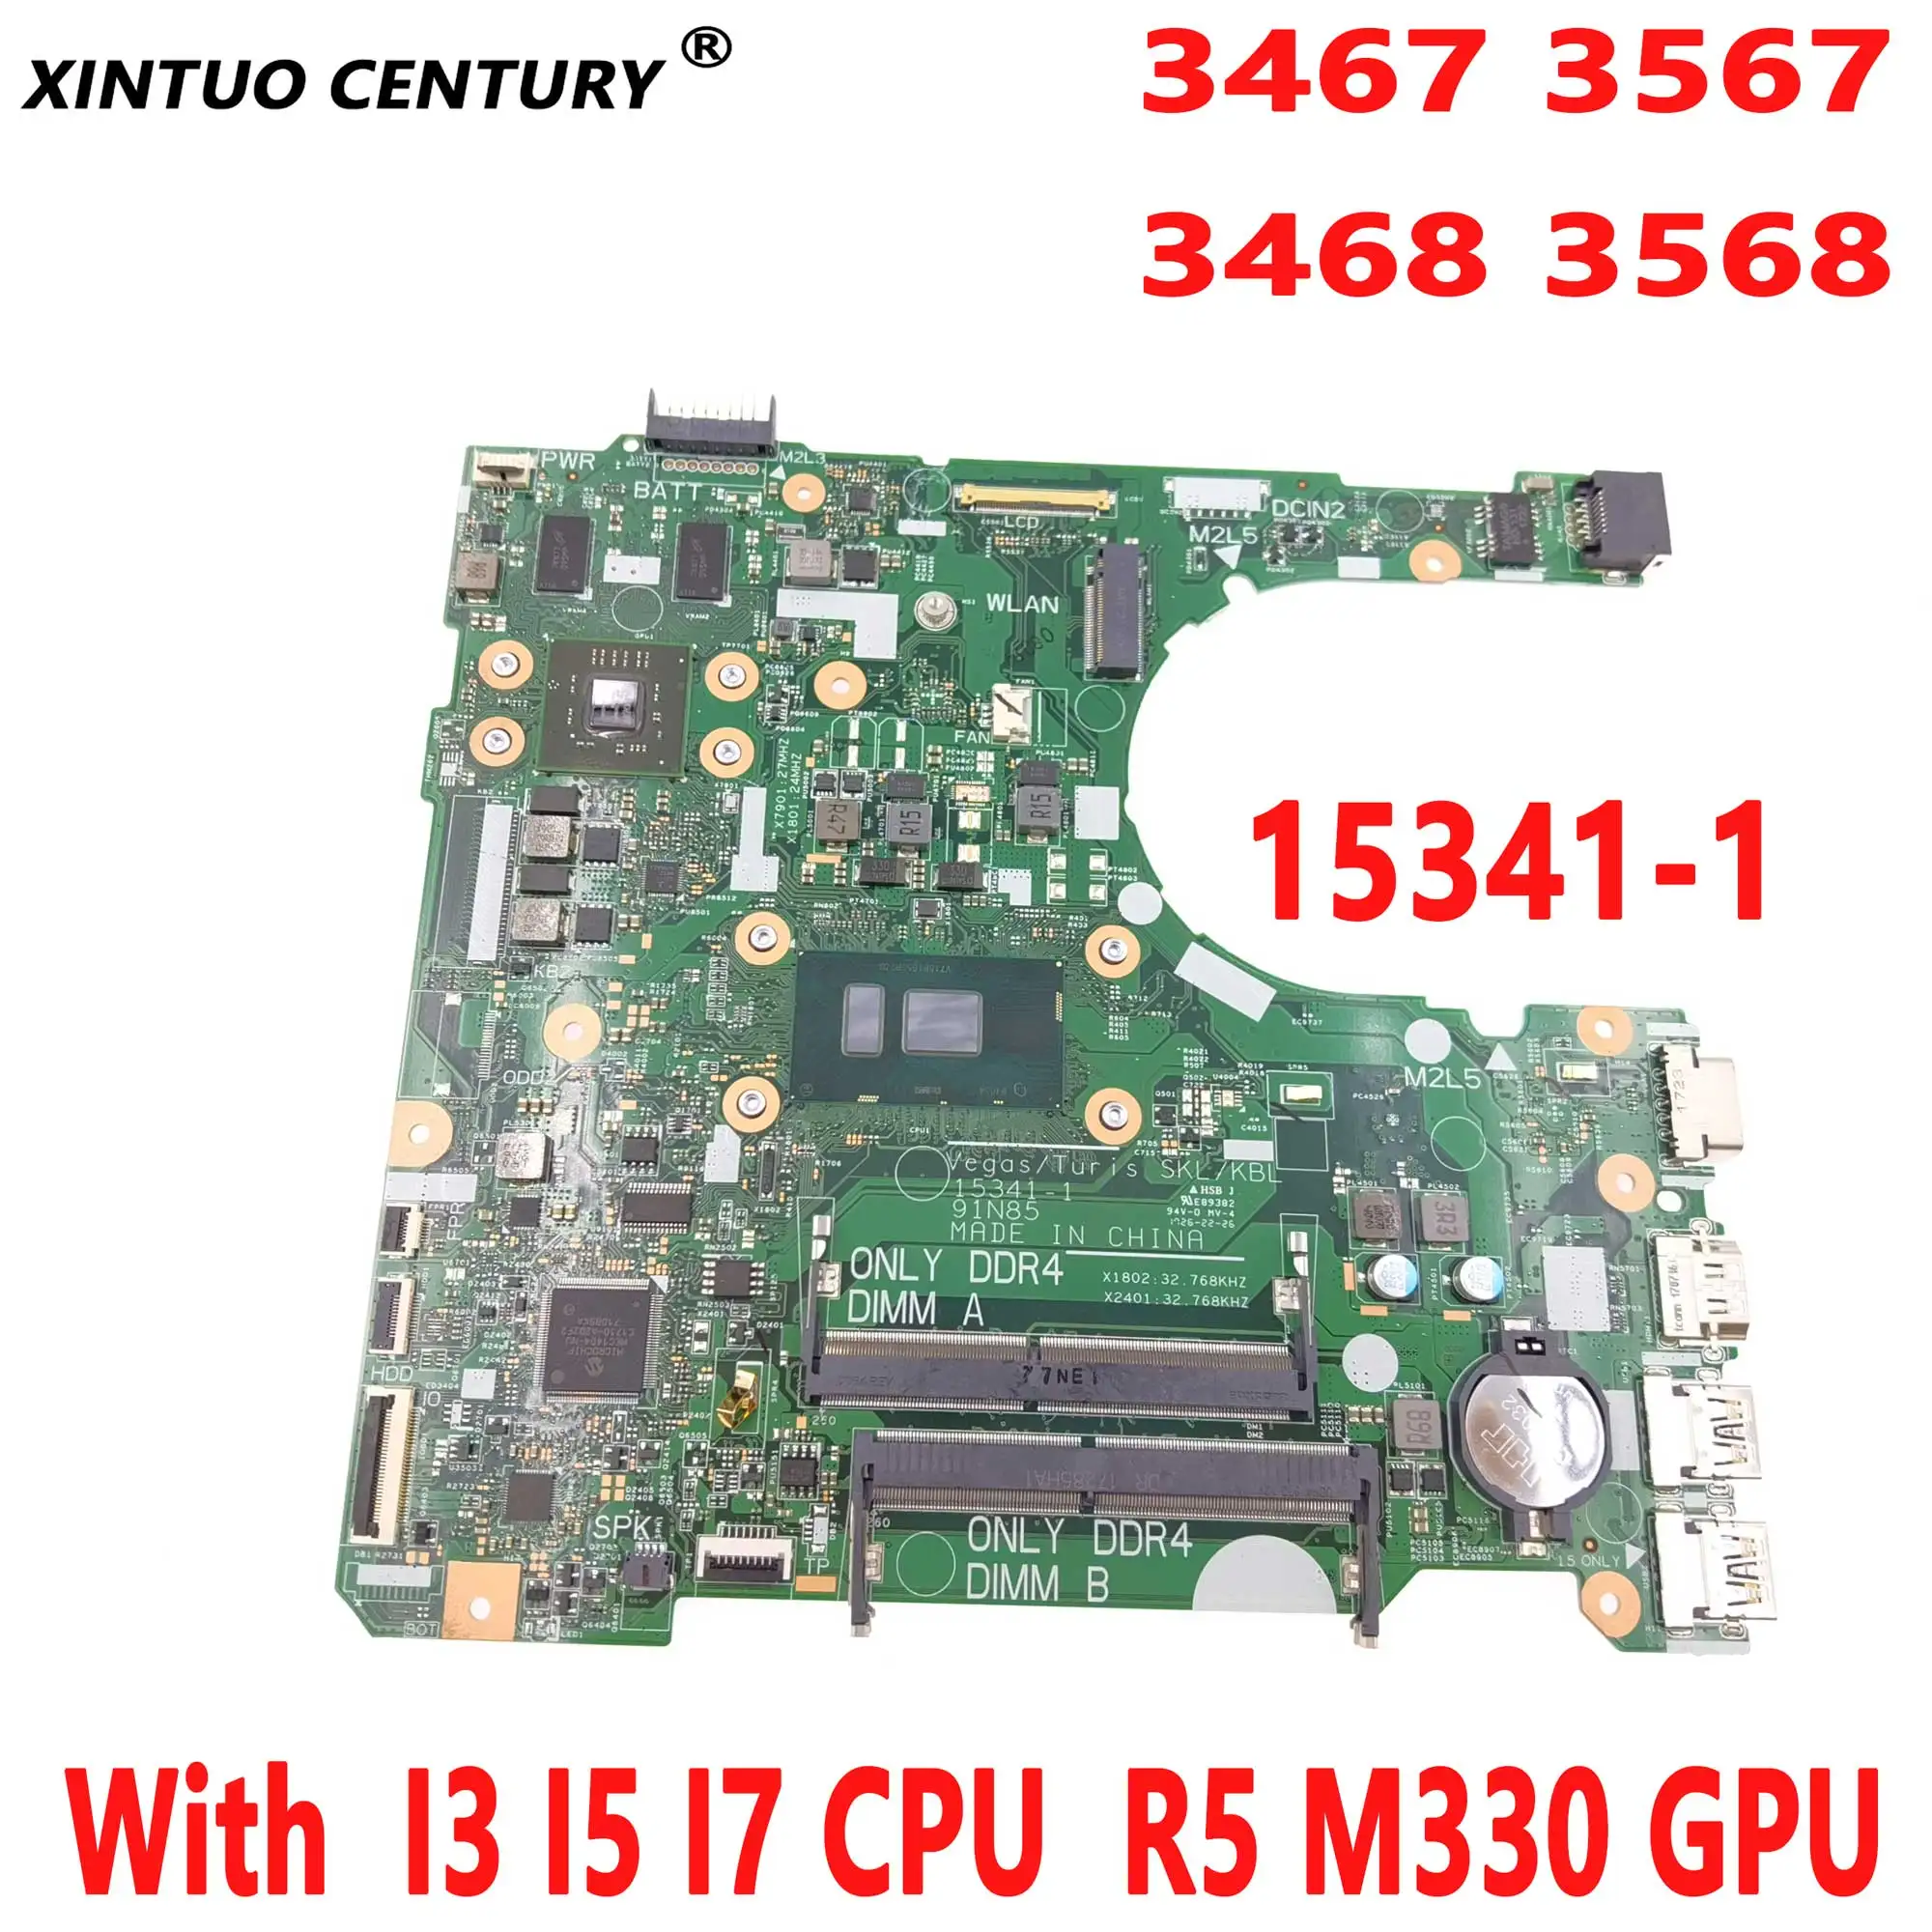 

15341-1 91N85 motherboard for Dell Vostro 3467 3567 3468 3568 Laptop motherboard with I3 I5 I7 CPU R5 M330 GPU DDR4 100% tested